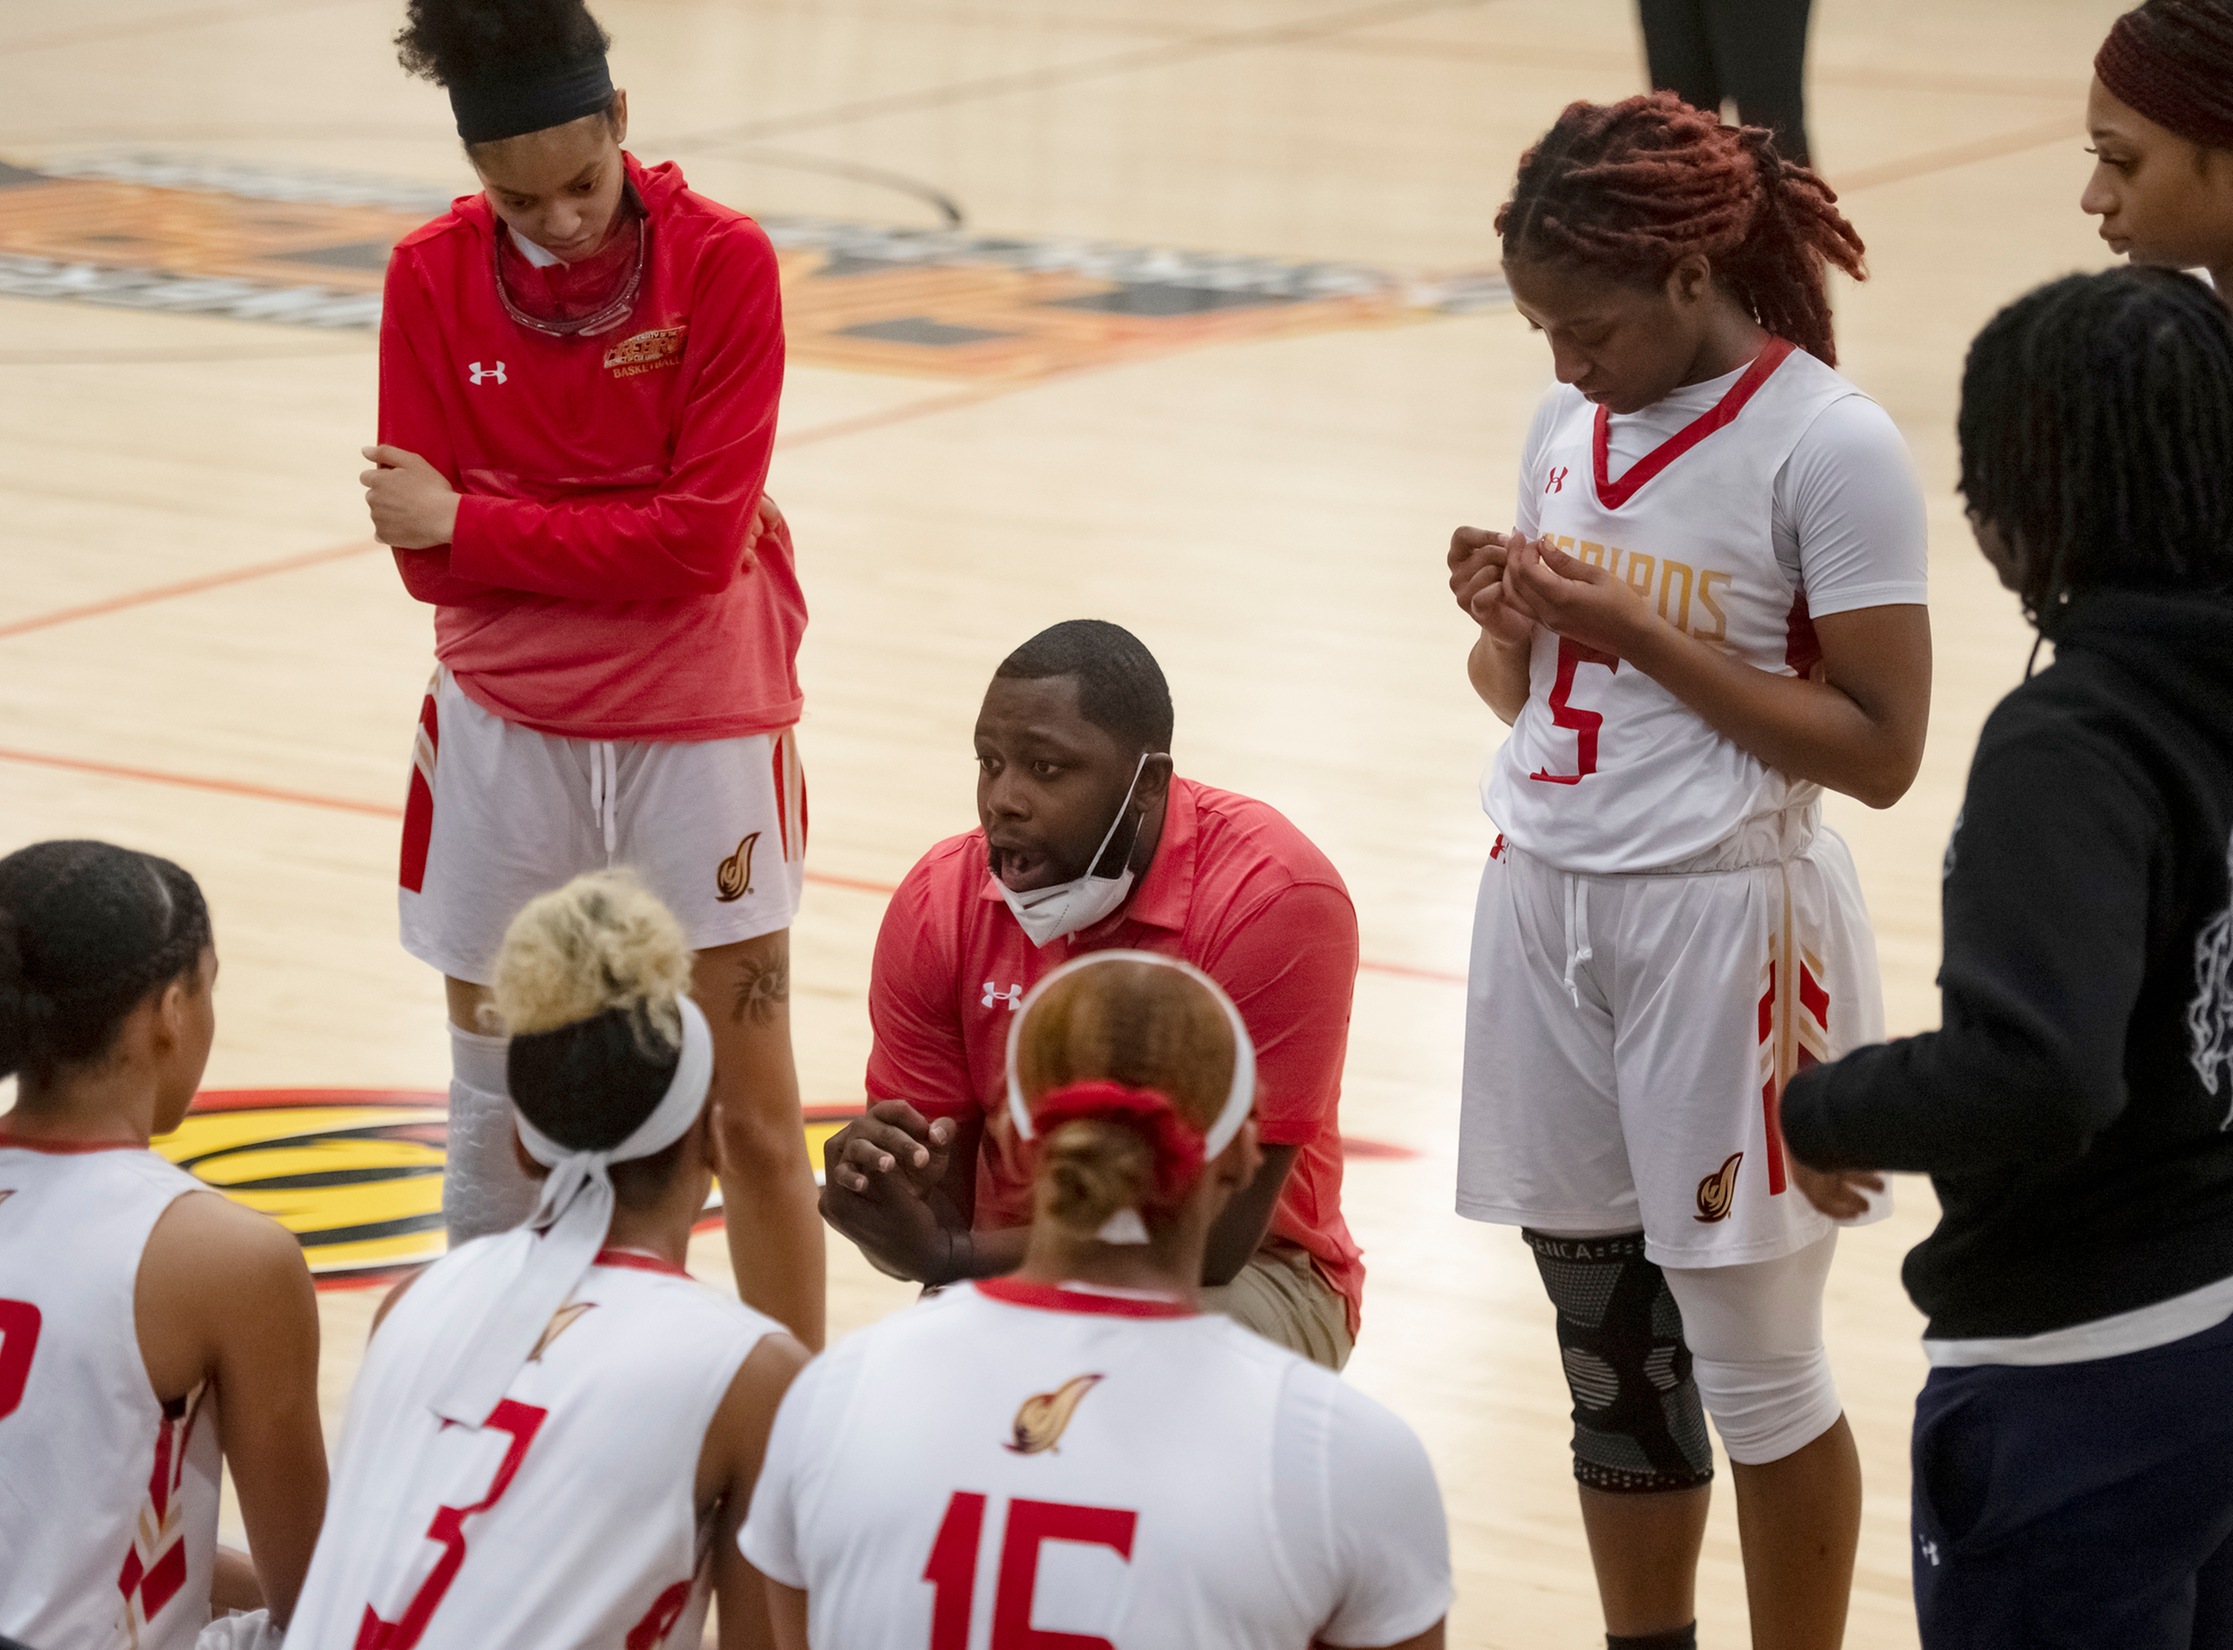 UDC finishes out the season with a 13-15 overall record, and their first post-season appearance under Head Coach John Nakpodia.